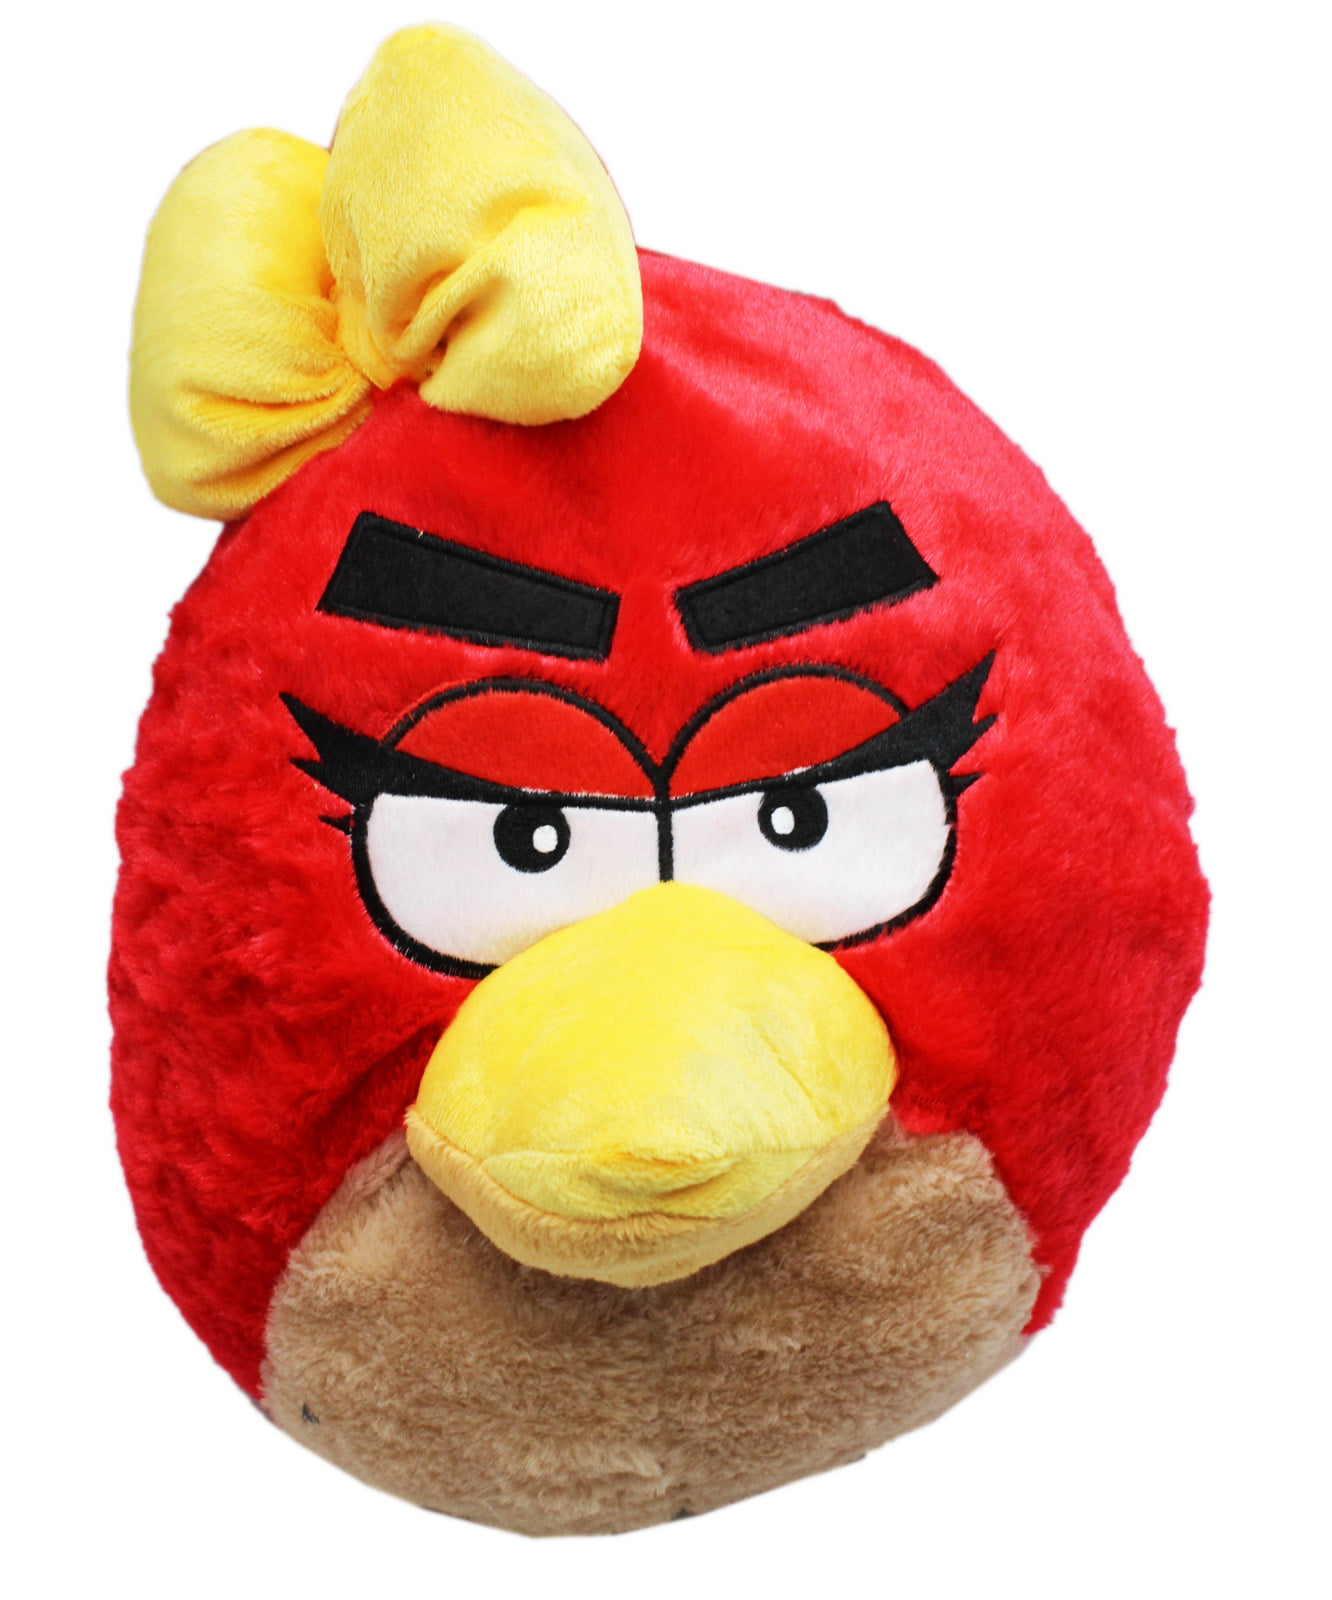 Rovio Angry Birds Travel Pillow and Throw Blanket For Kids Official Licensed 